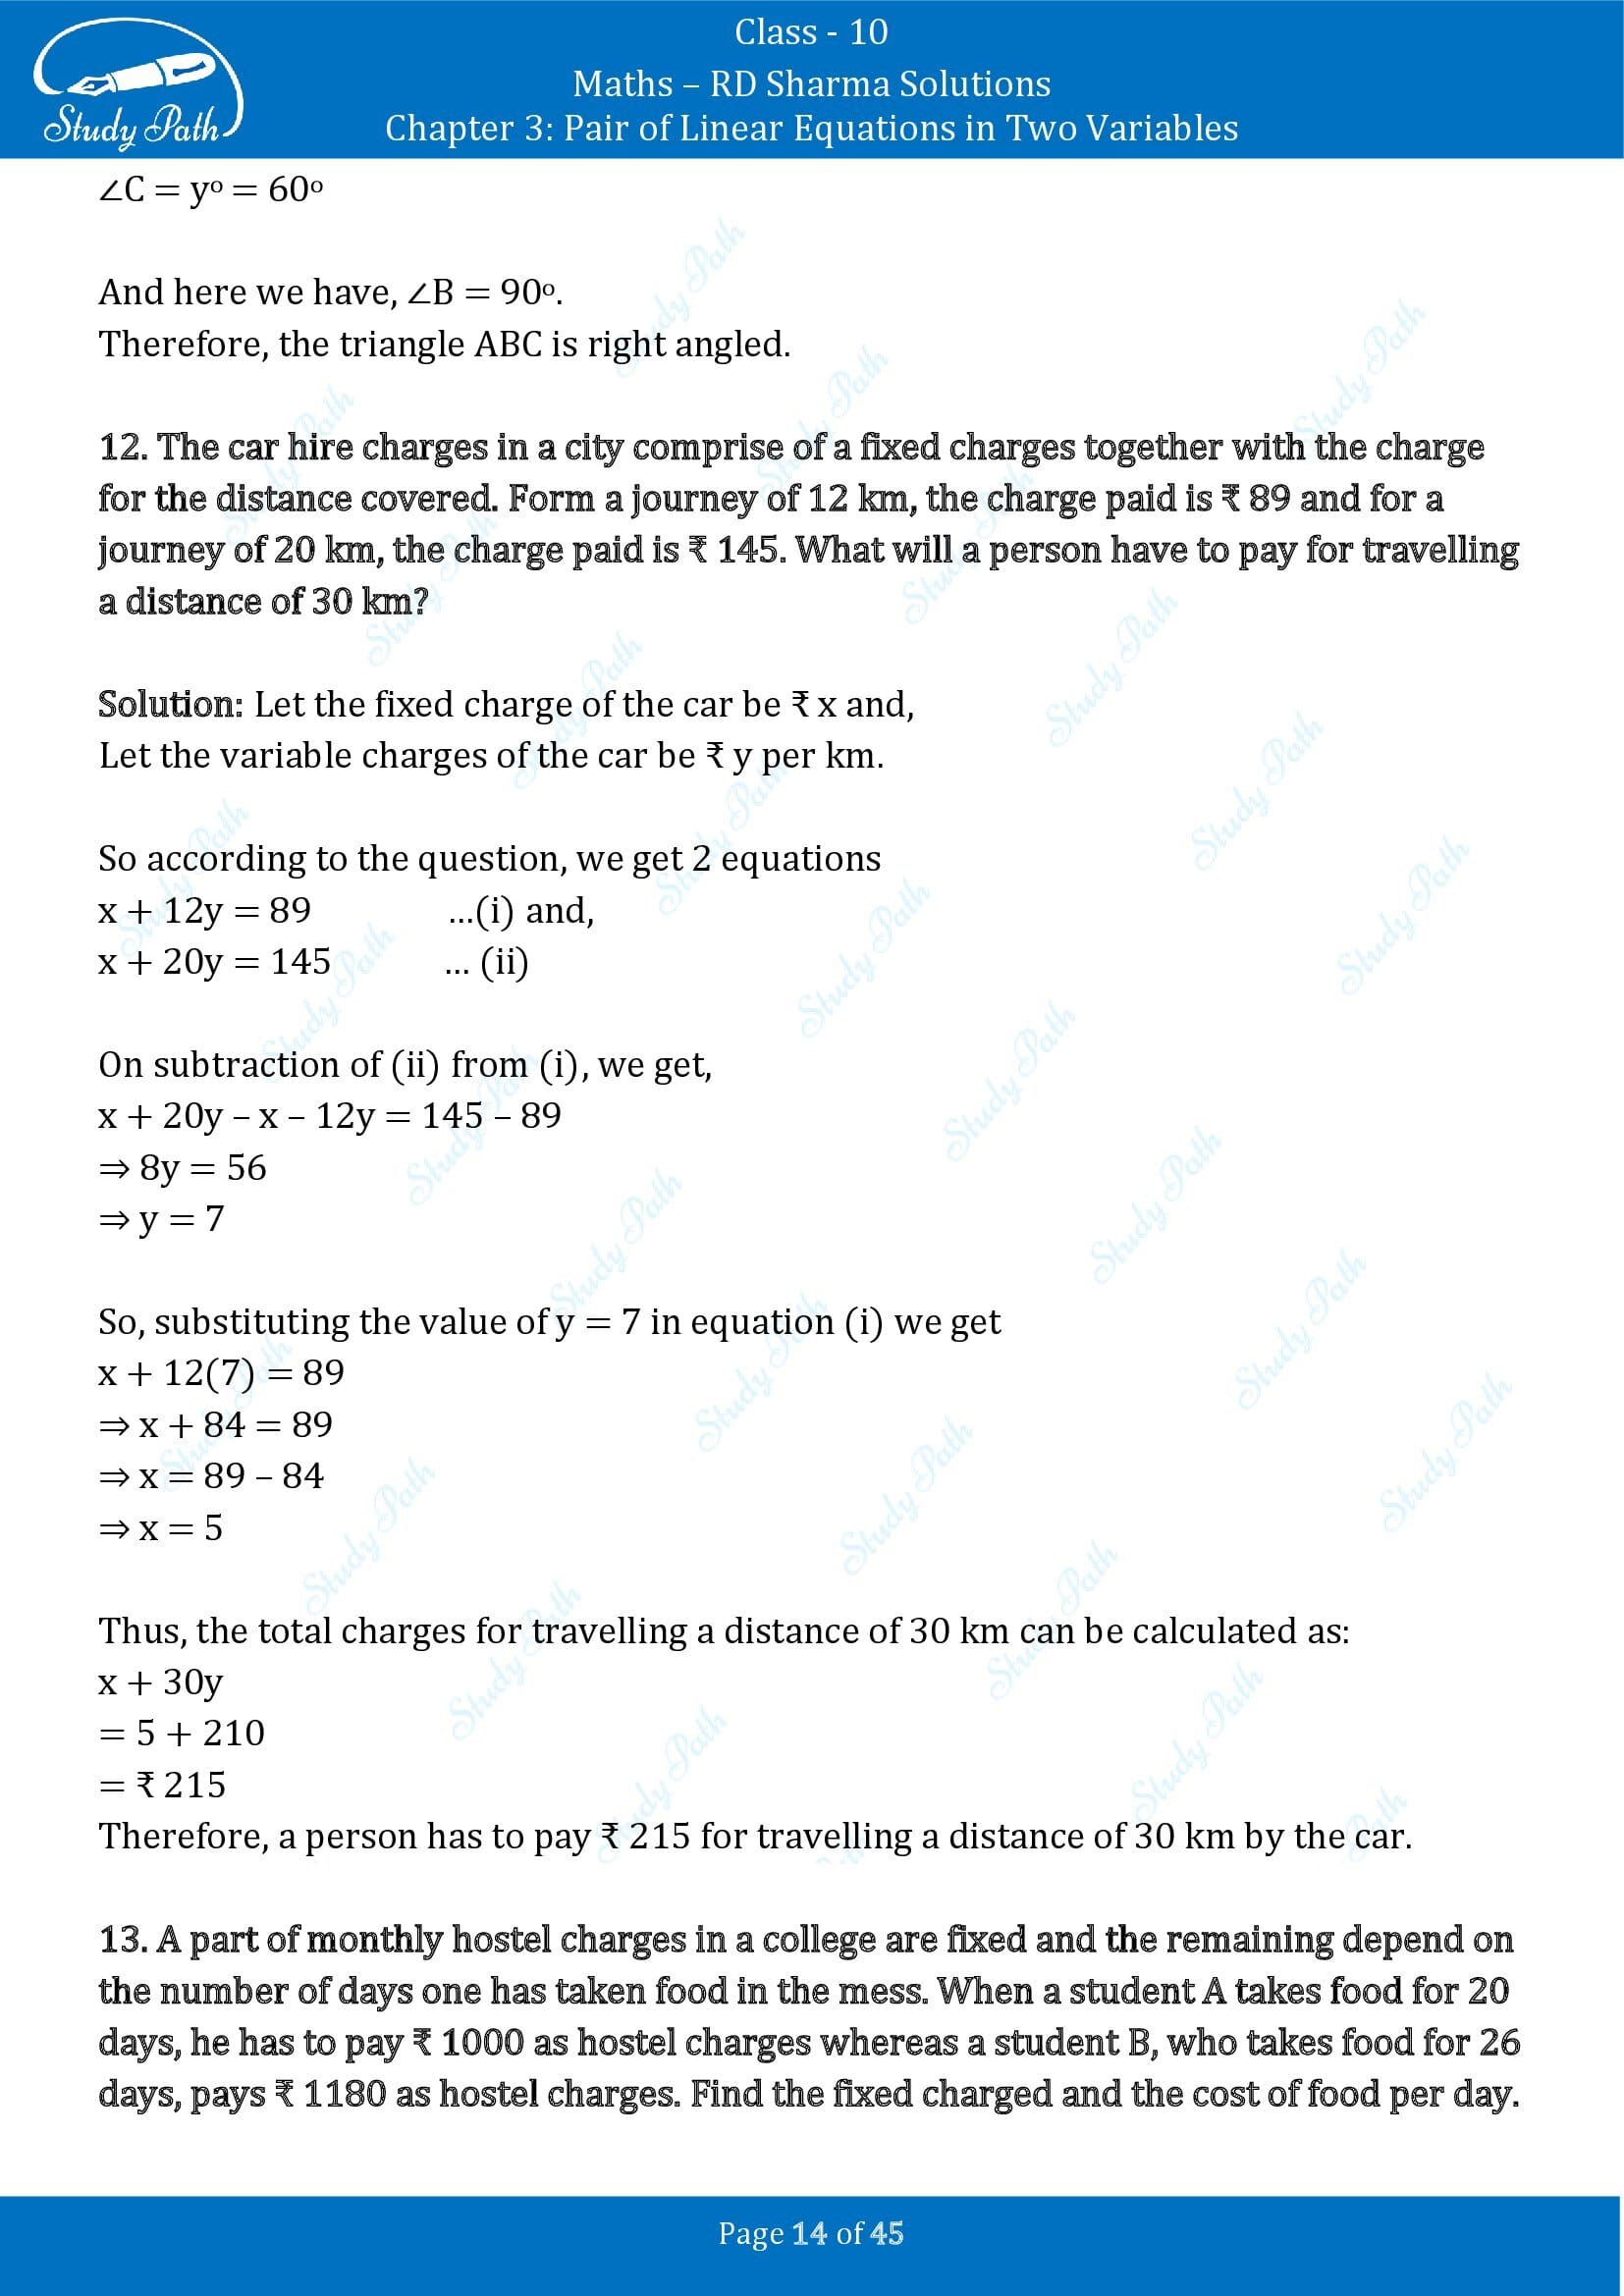 RD Sharma Solutions Class 10 Chapter 3 Pair of Linear Equations in Two Variables Exercise 3.11 00014